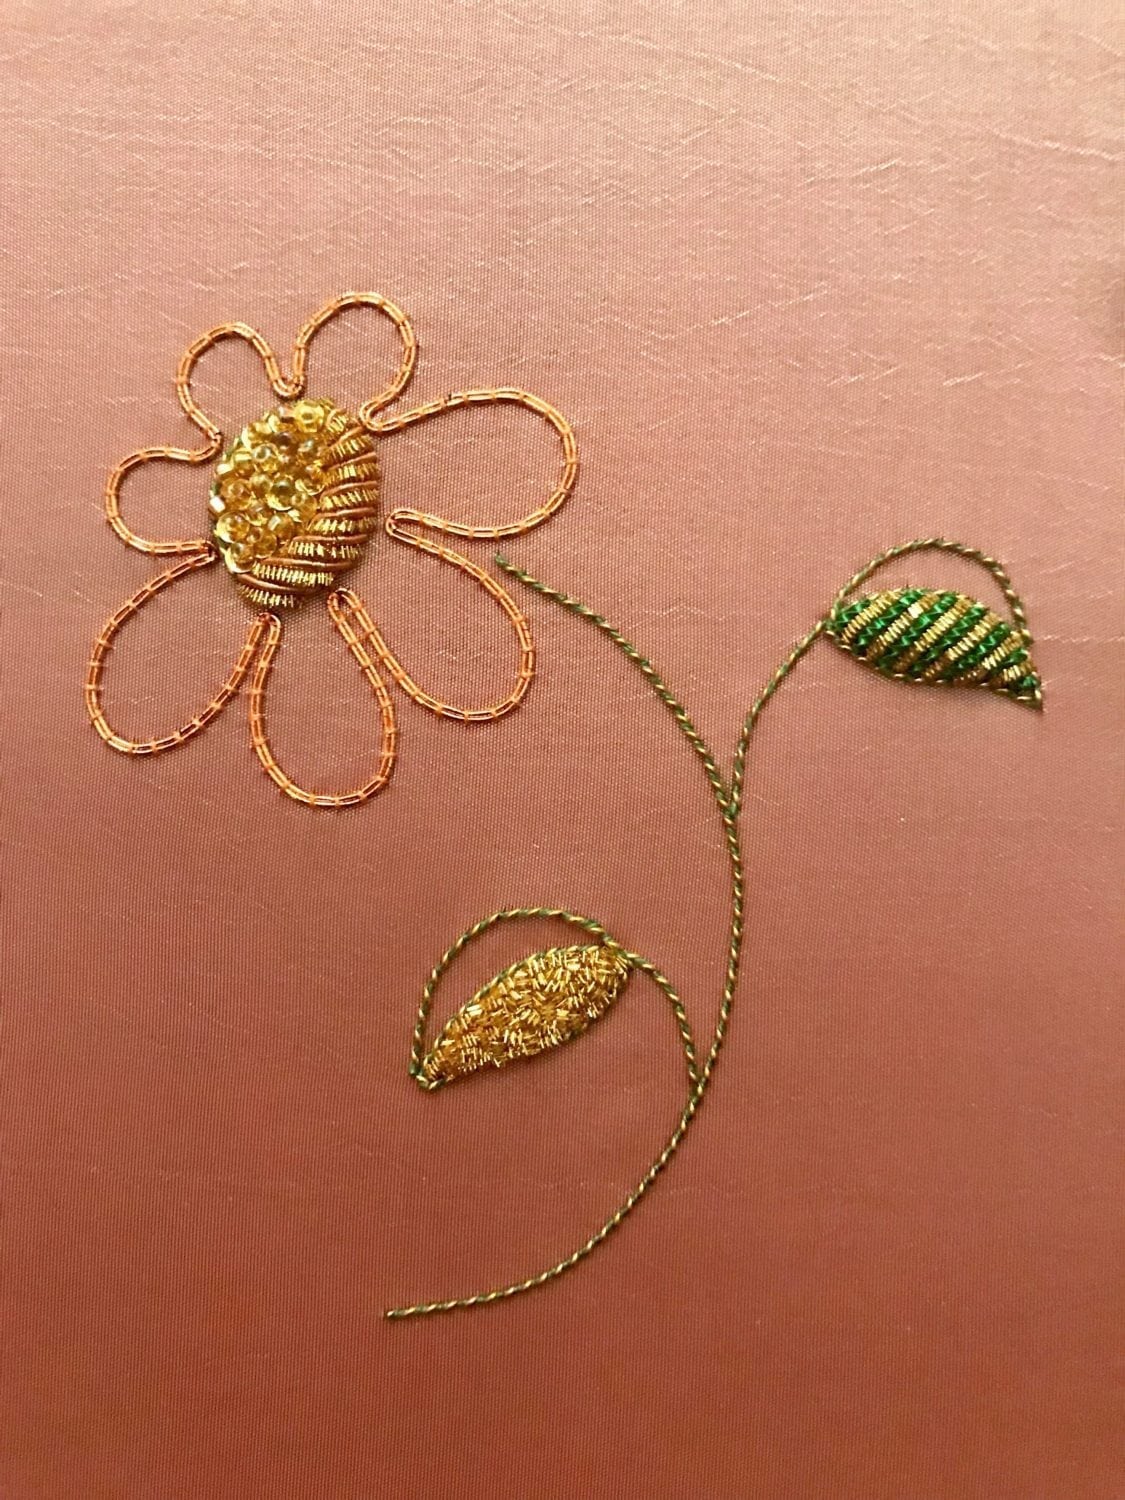 Embroidery Kit Brooch Goldwork Hand Embroidery Kit